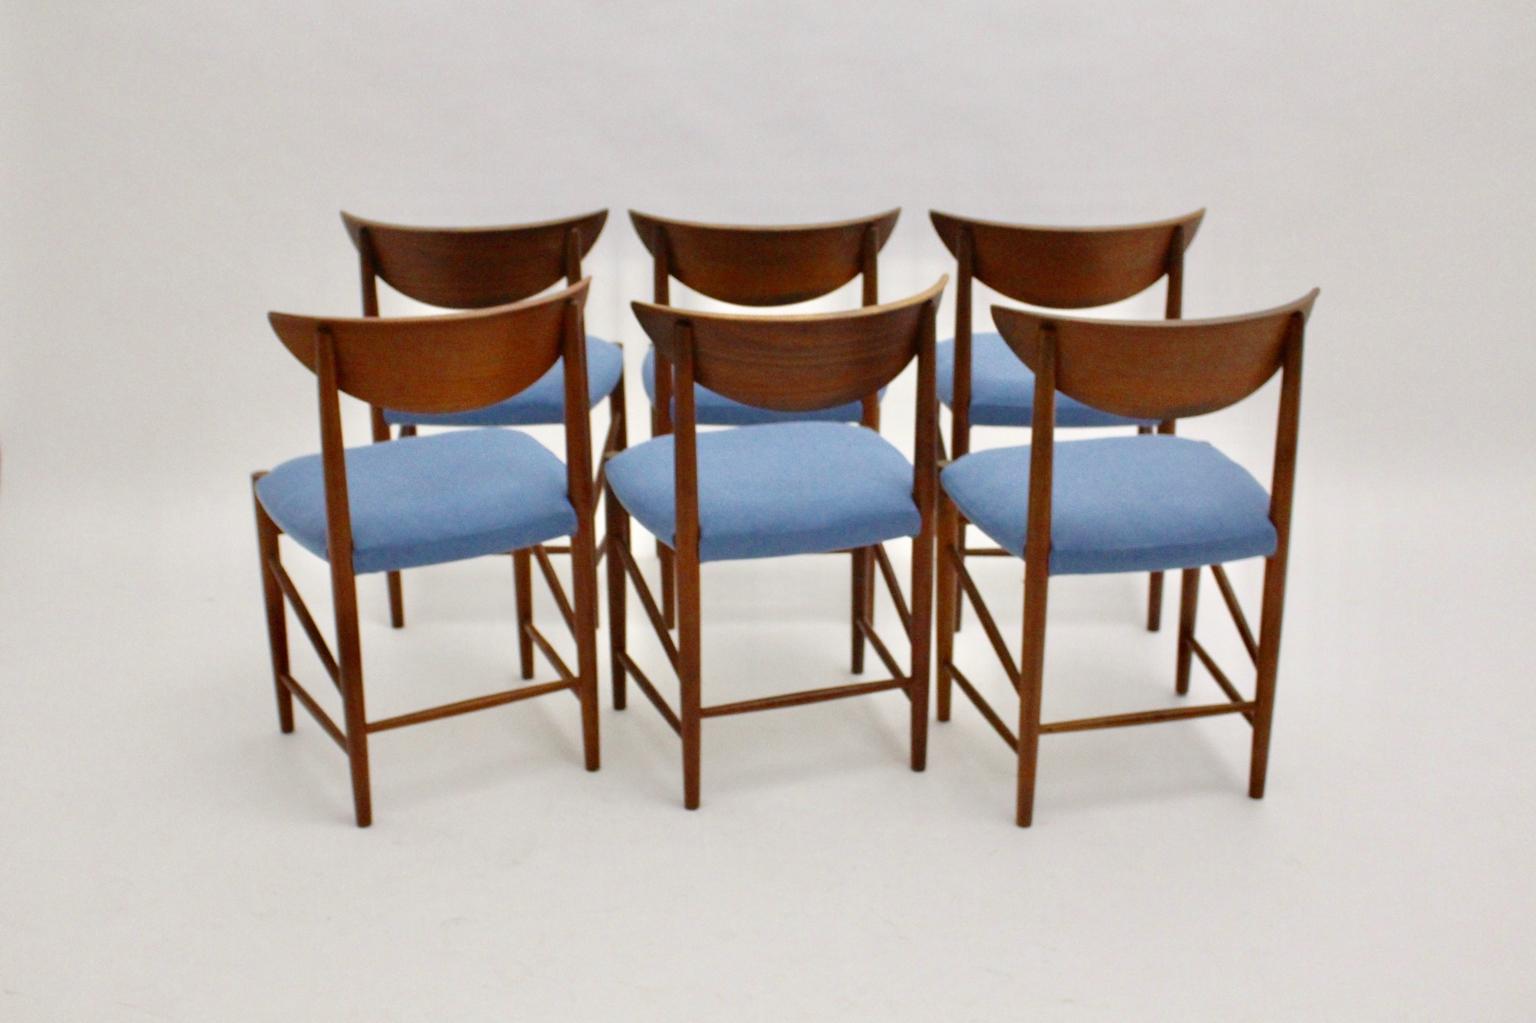 Fabric Scandinavian Modern Six Vintage Teak Dining Chairs or Chairs Peter Hvidt Denmark For Sale